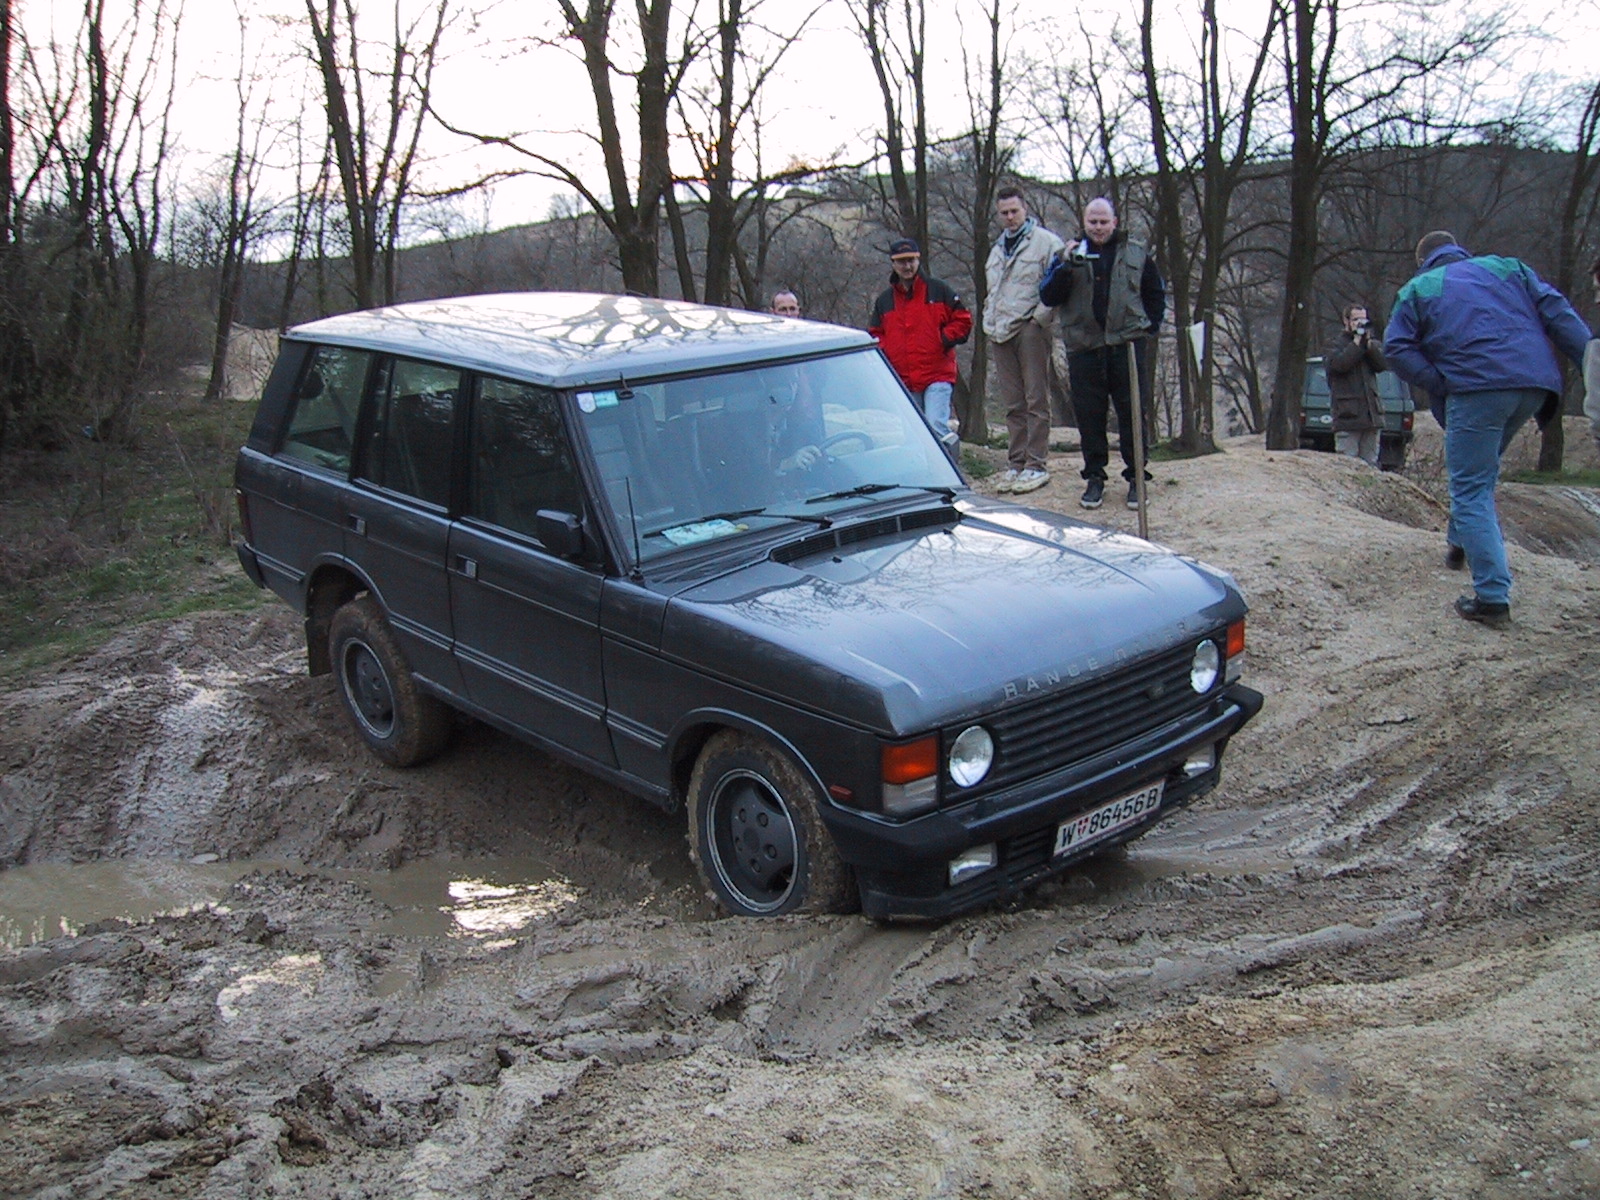 Testing the Defender offroad